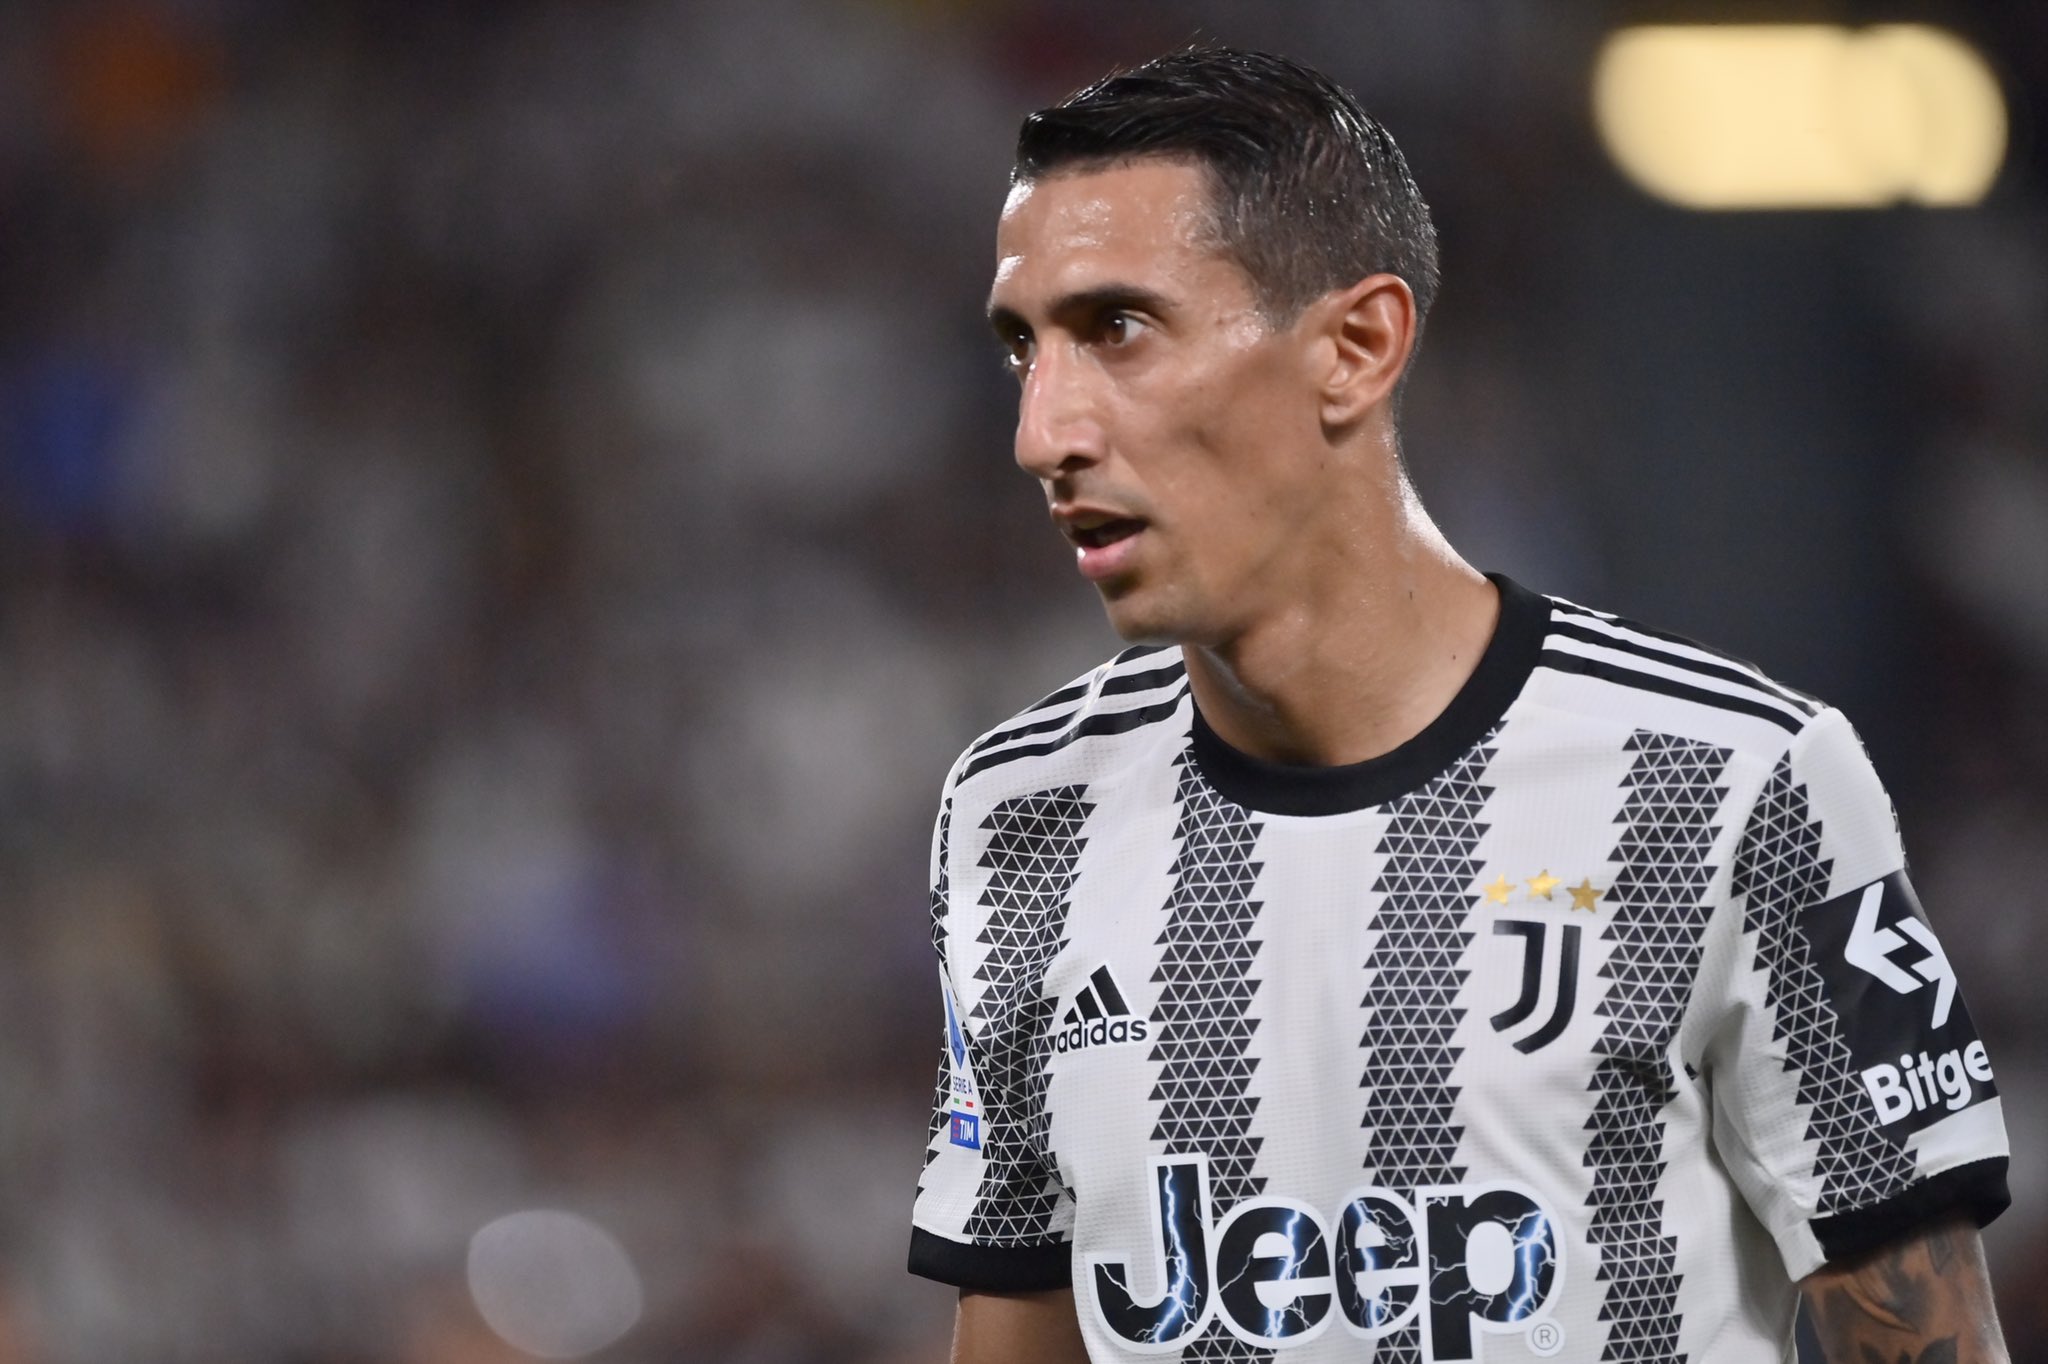 Di Maria Transfer: Angel Di Maria rubbishes speculations on departure, confirms STAY at JUVENTUS - CHECK OUT